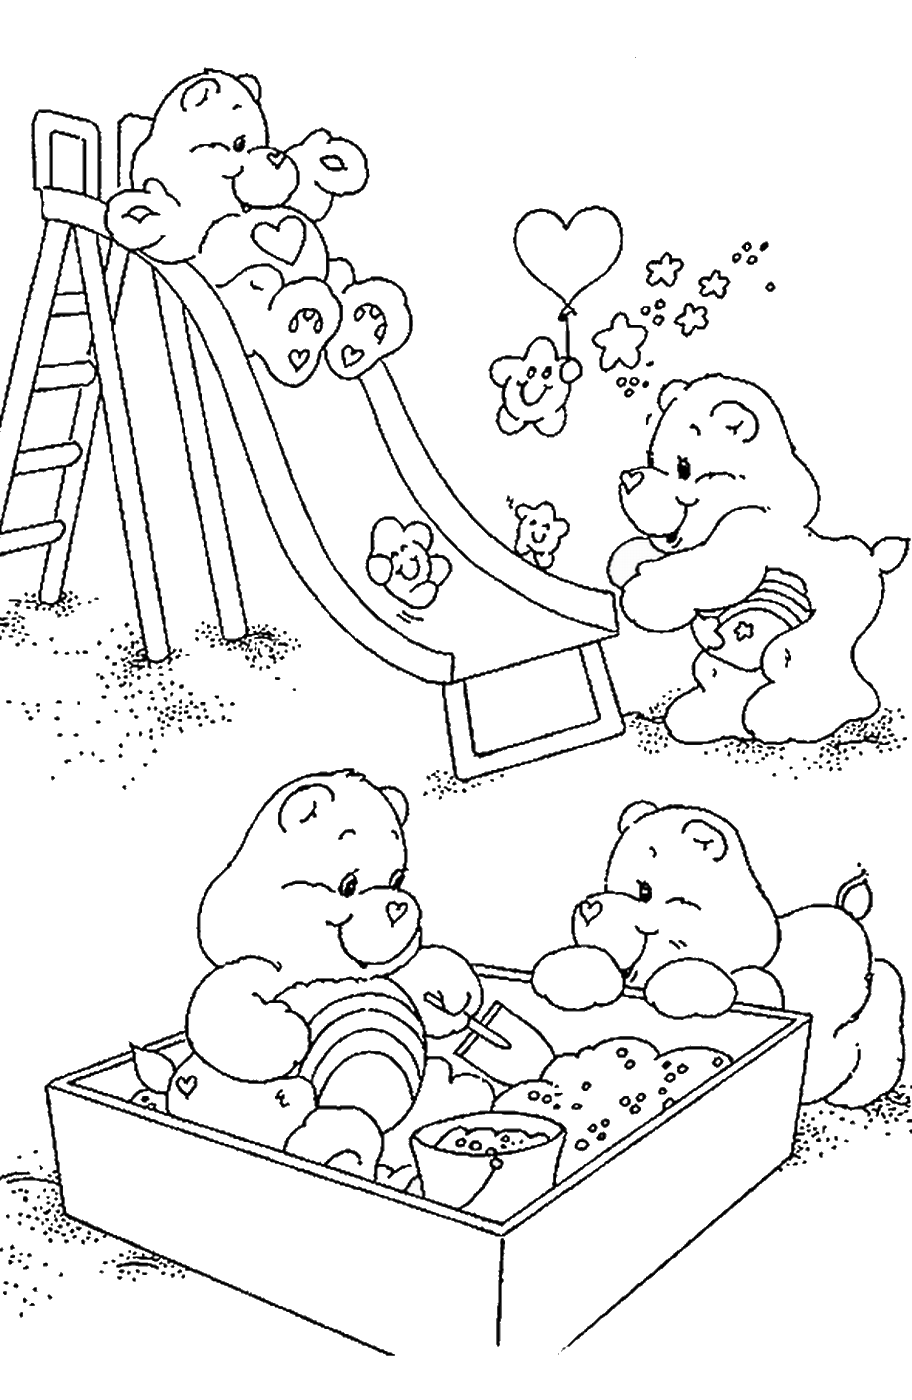 Care Bears Coloring Pages Cartoons care_bears_cl_40 Printable 2020 1574 Coloring4free